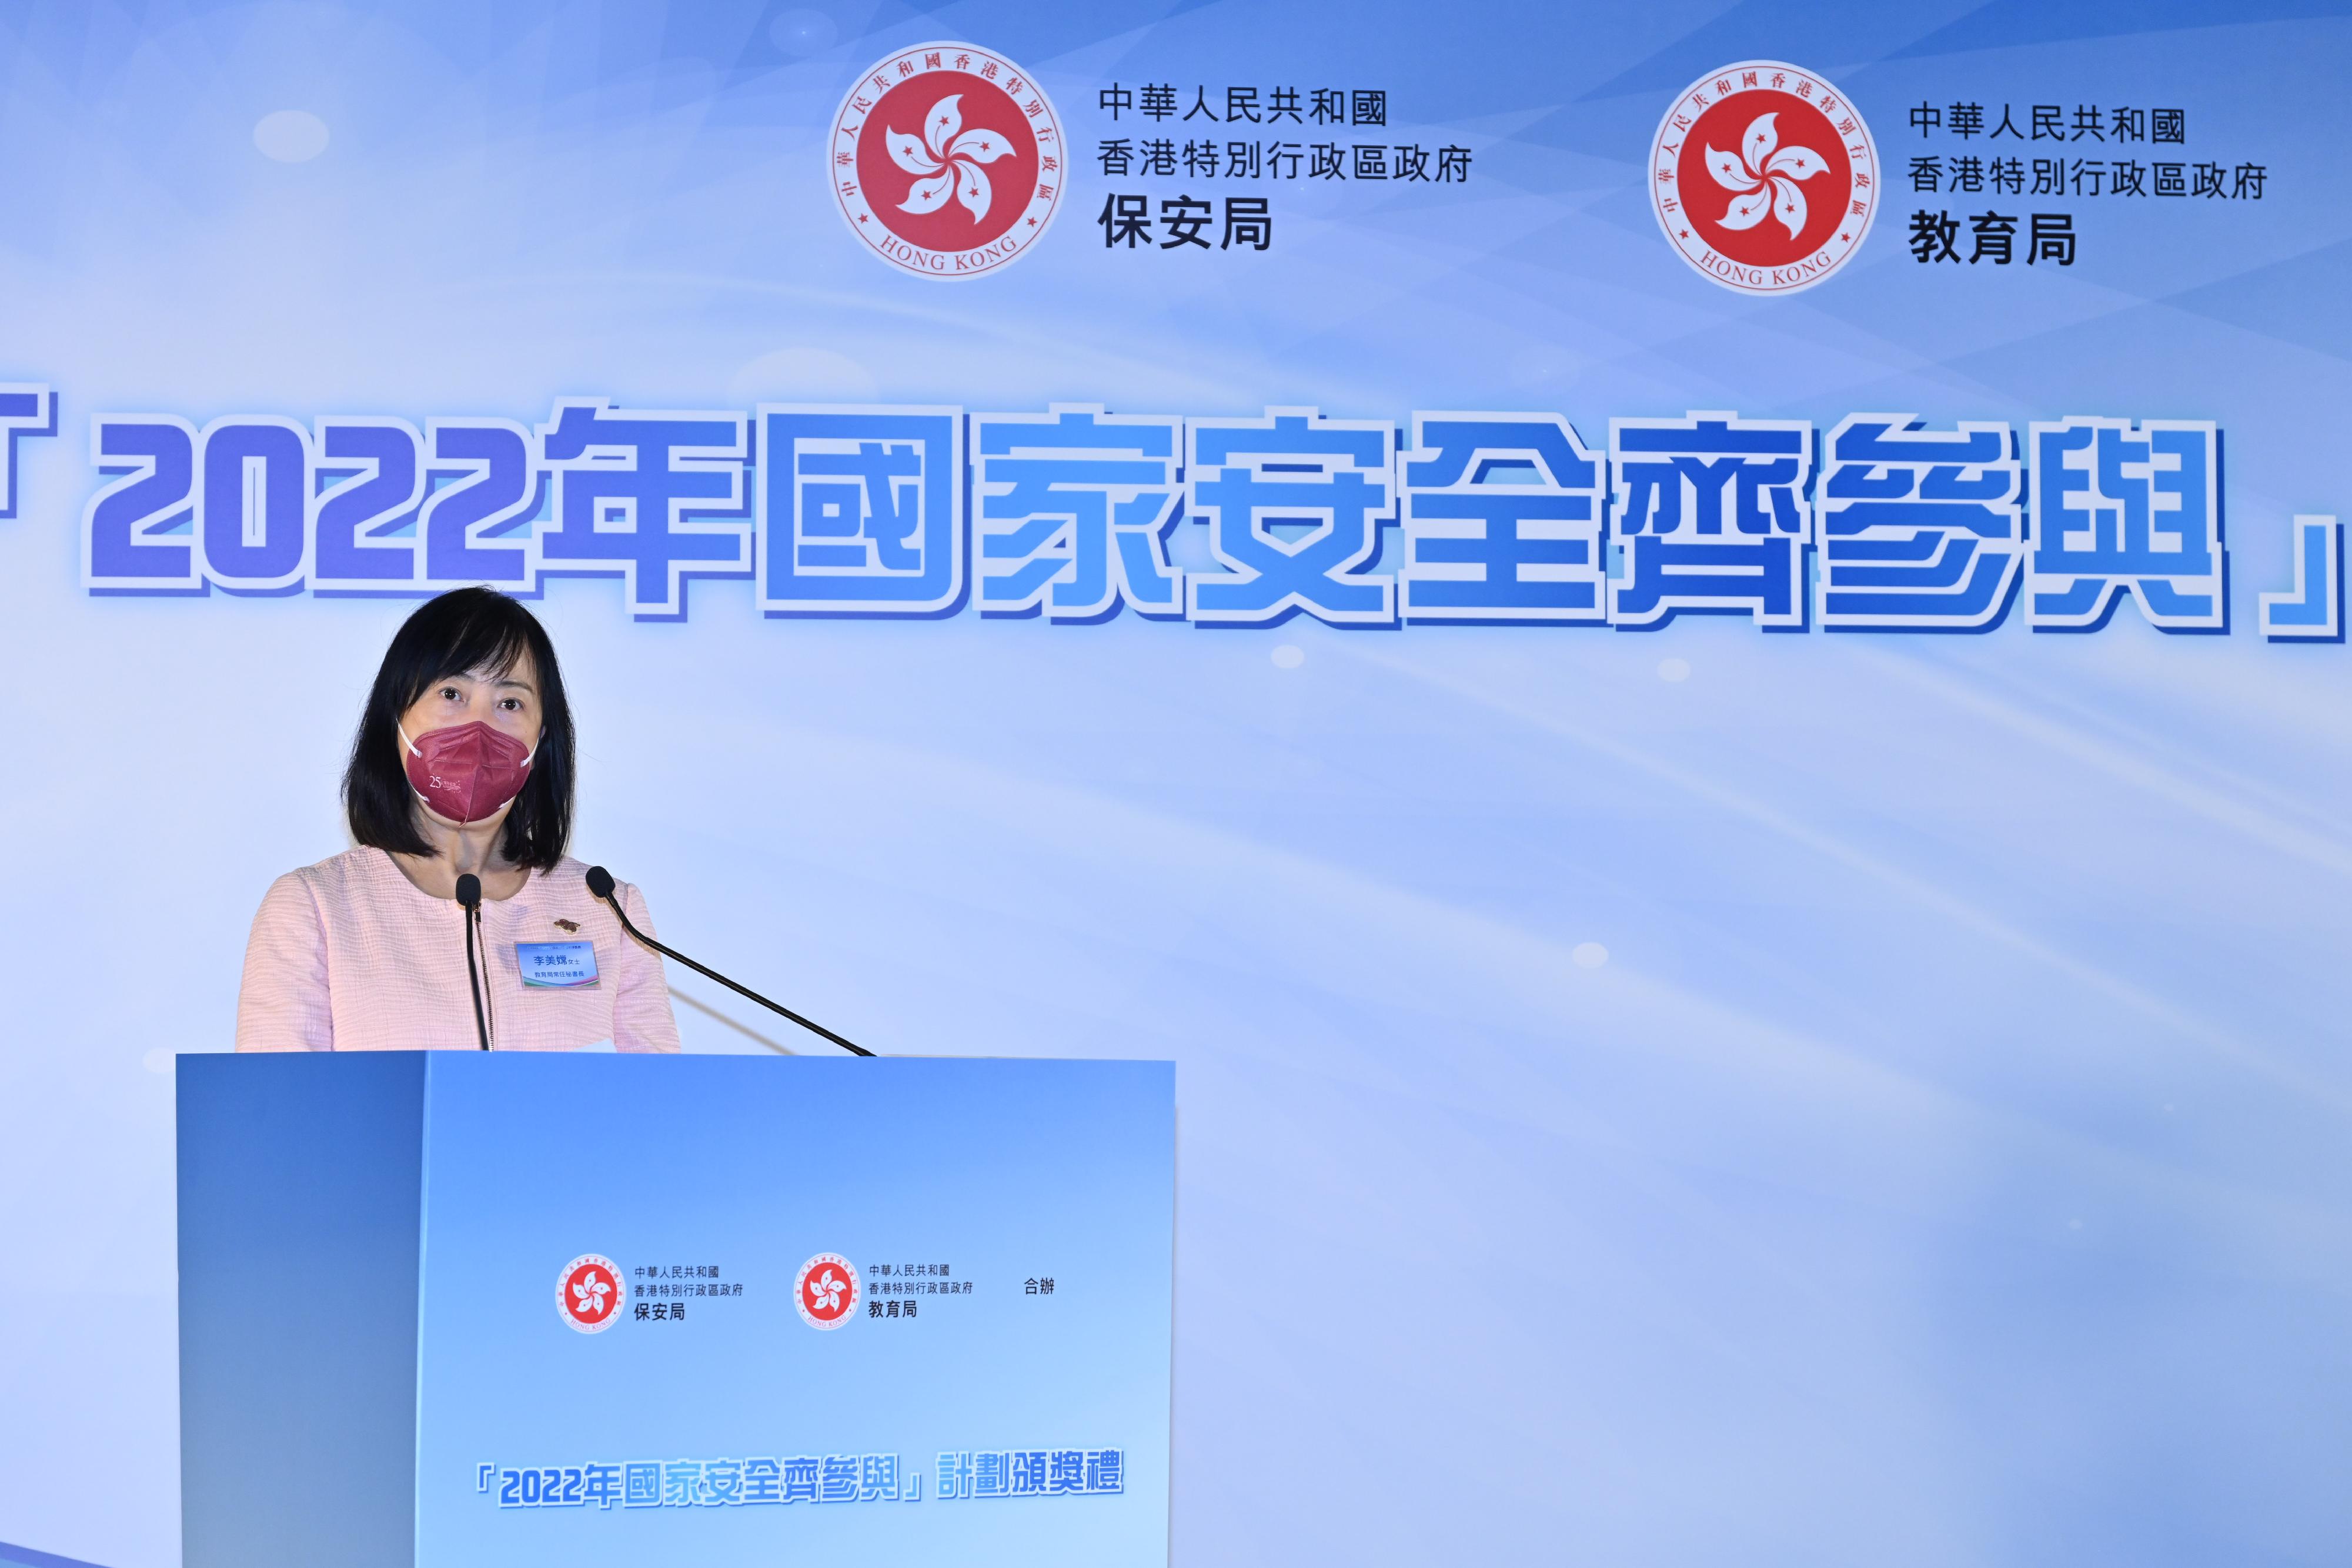 The Permanent Secretary for Education, Ms Michelle Li, gives a speech at the award ceremony for "2022 Let's Join Hands in Safeguarding National Security" Programme today (July 29).